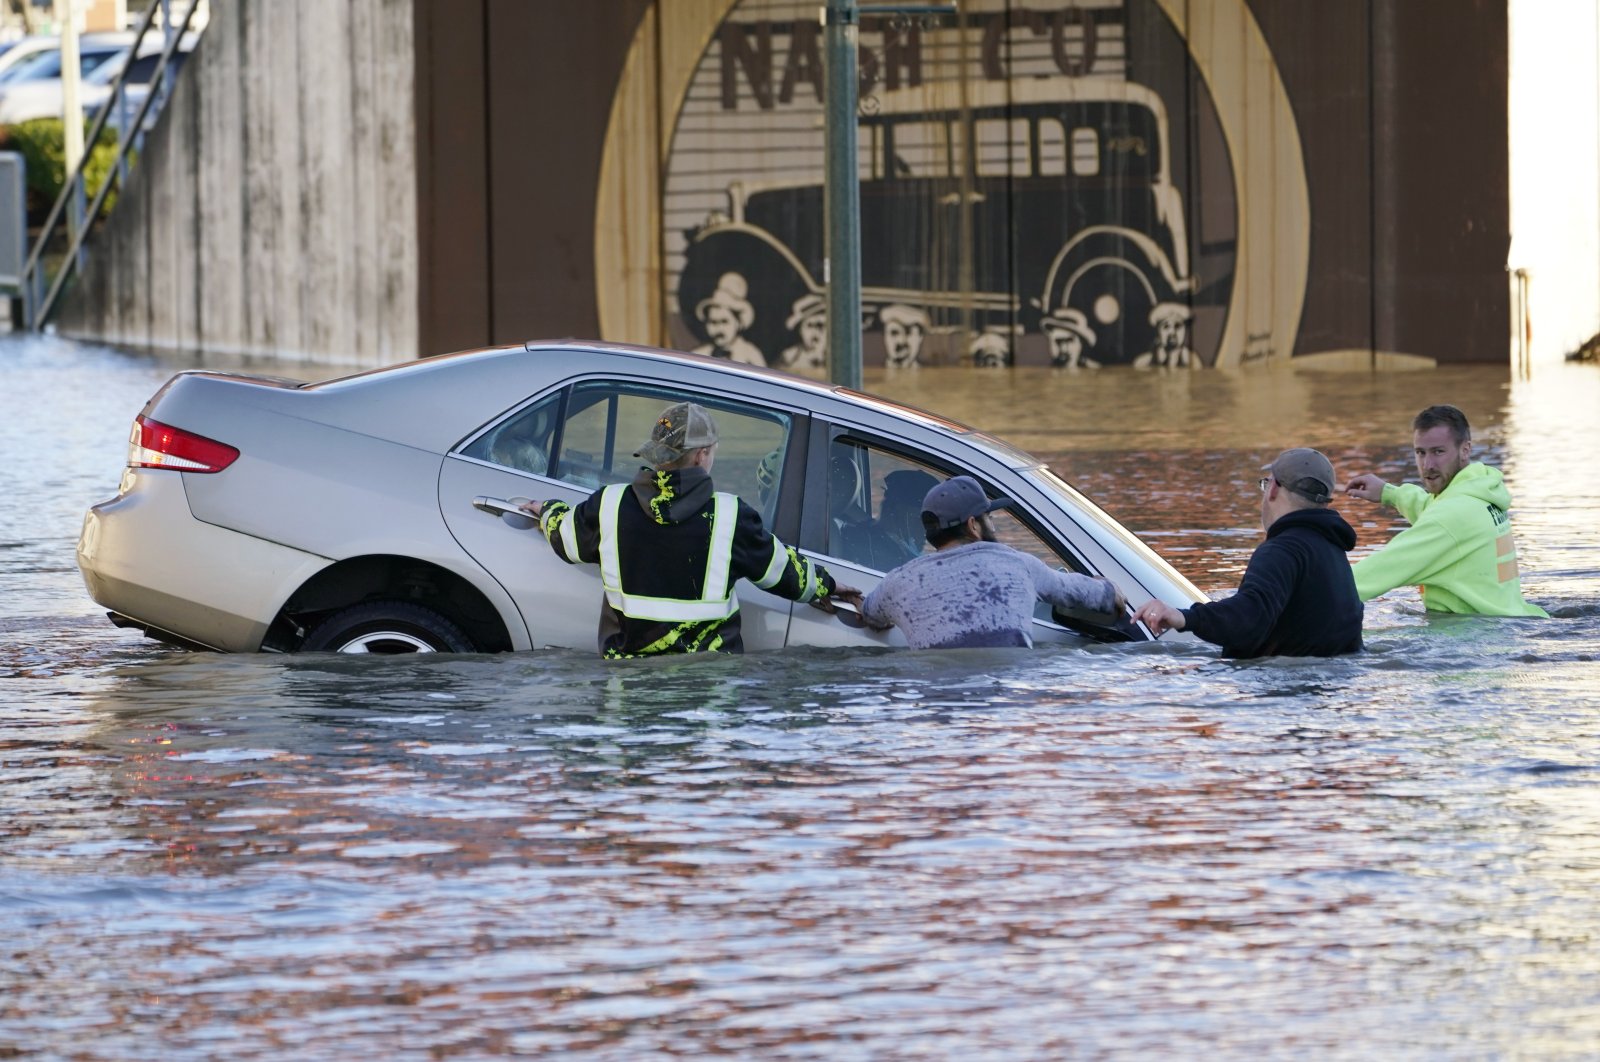 Passersby surround a car whose driver went past a barricade and into the flooded Nooksack River in Ferndale, Washington, U.S., Nov. 16, 2021. (AP Photo)